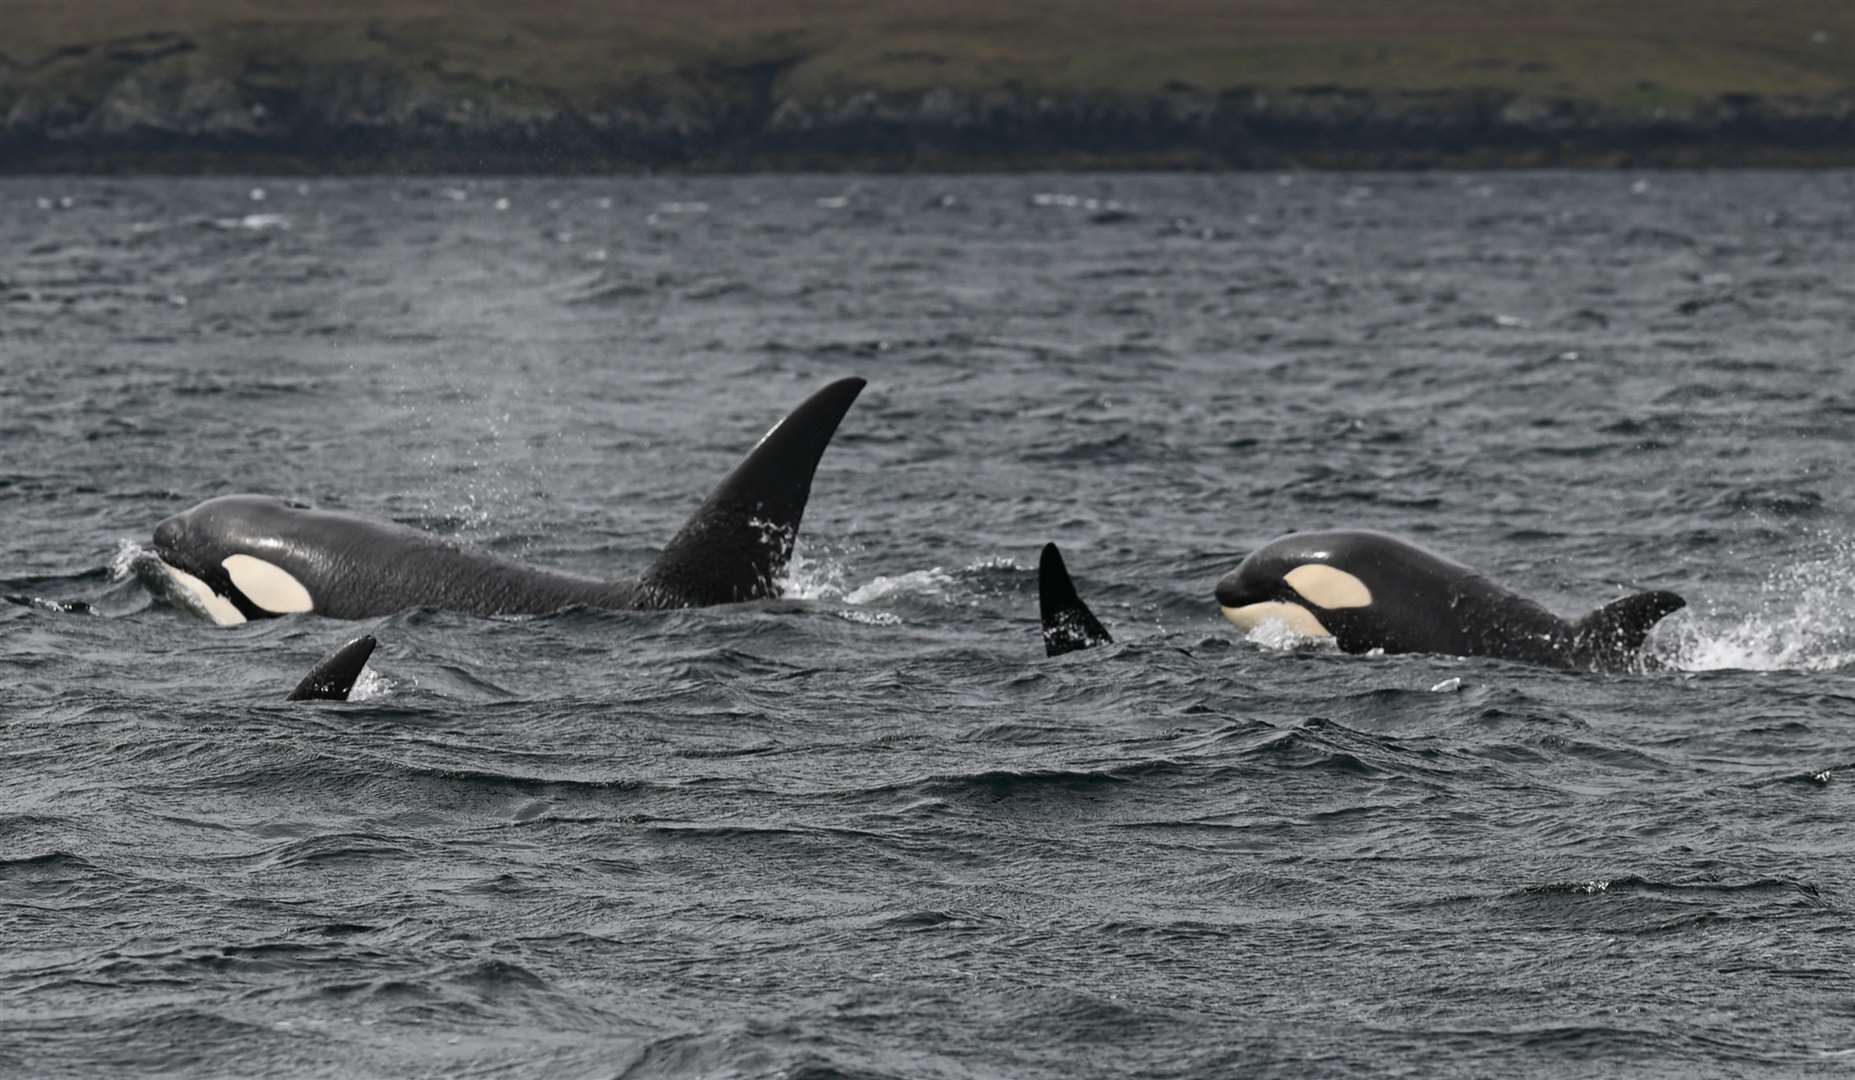 Orcas photographed during the 2021 event.